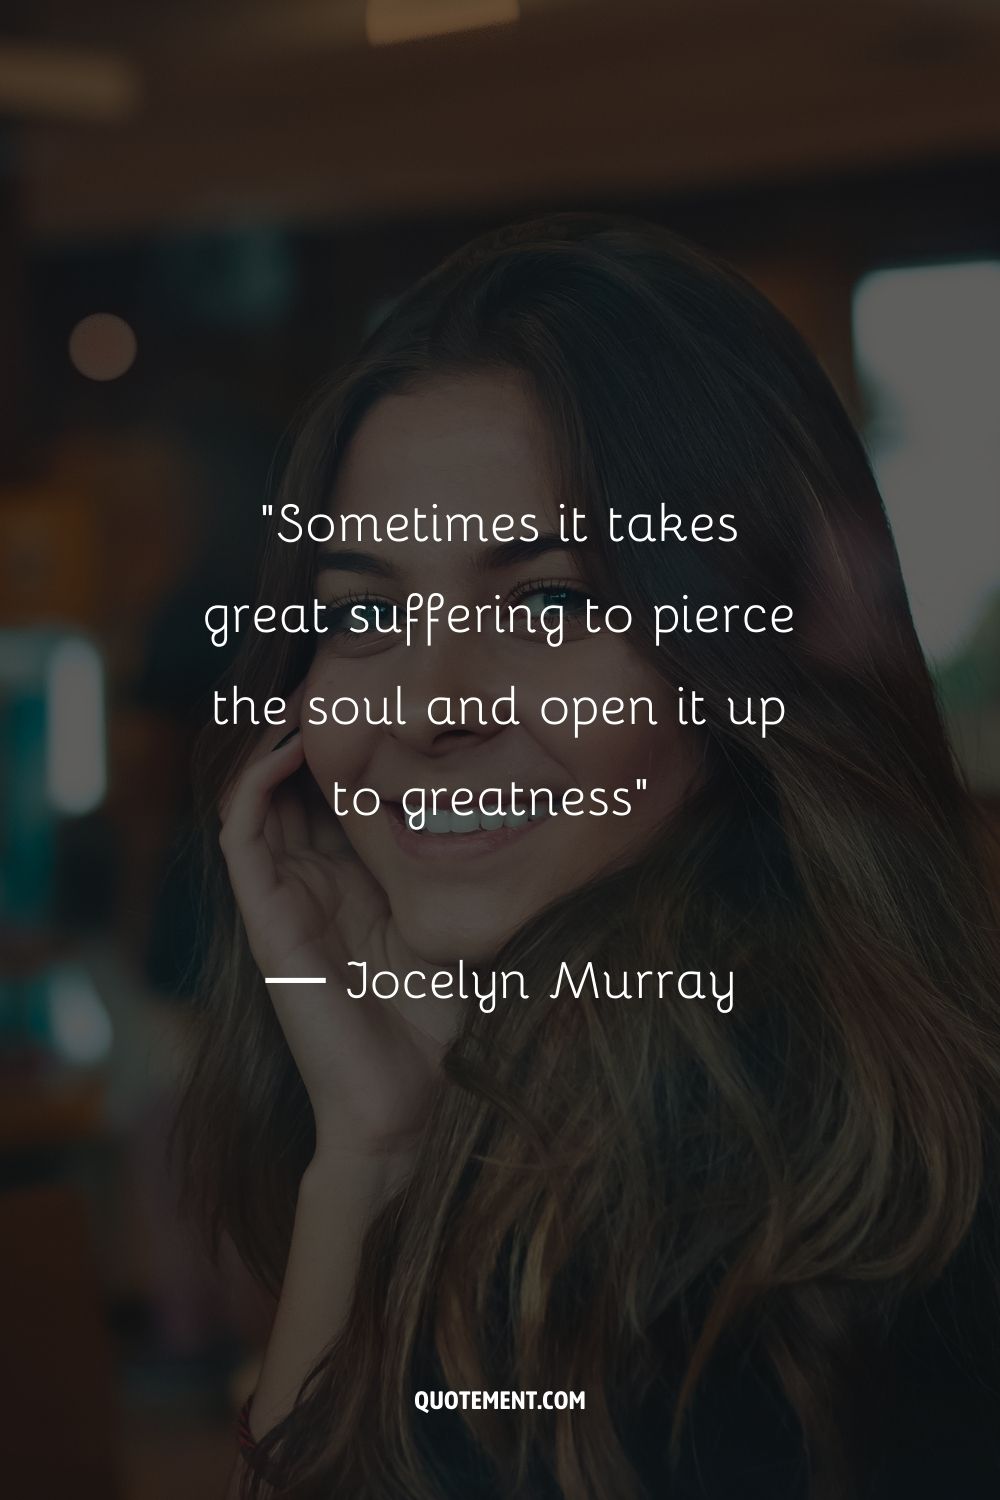 Sometimes it takes great suffering to pierce the soul and open it up to greatness